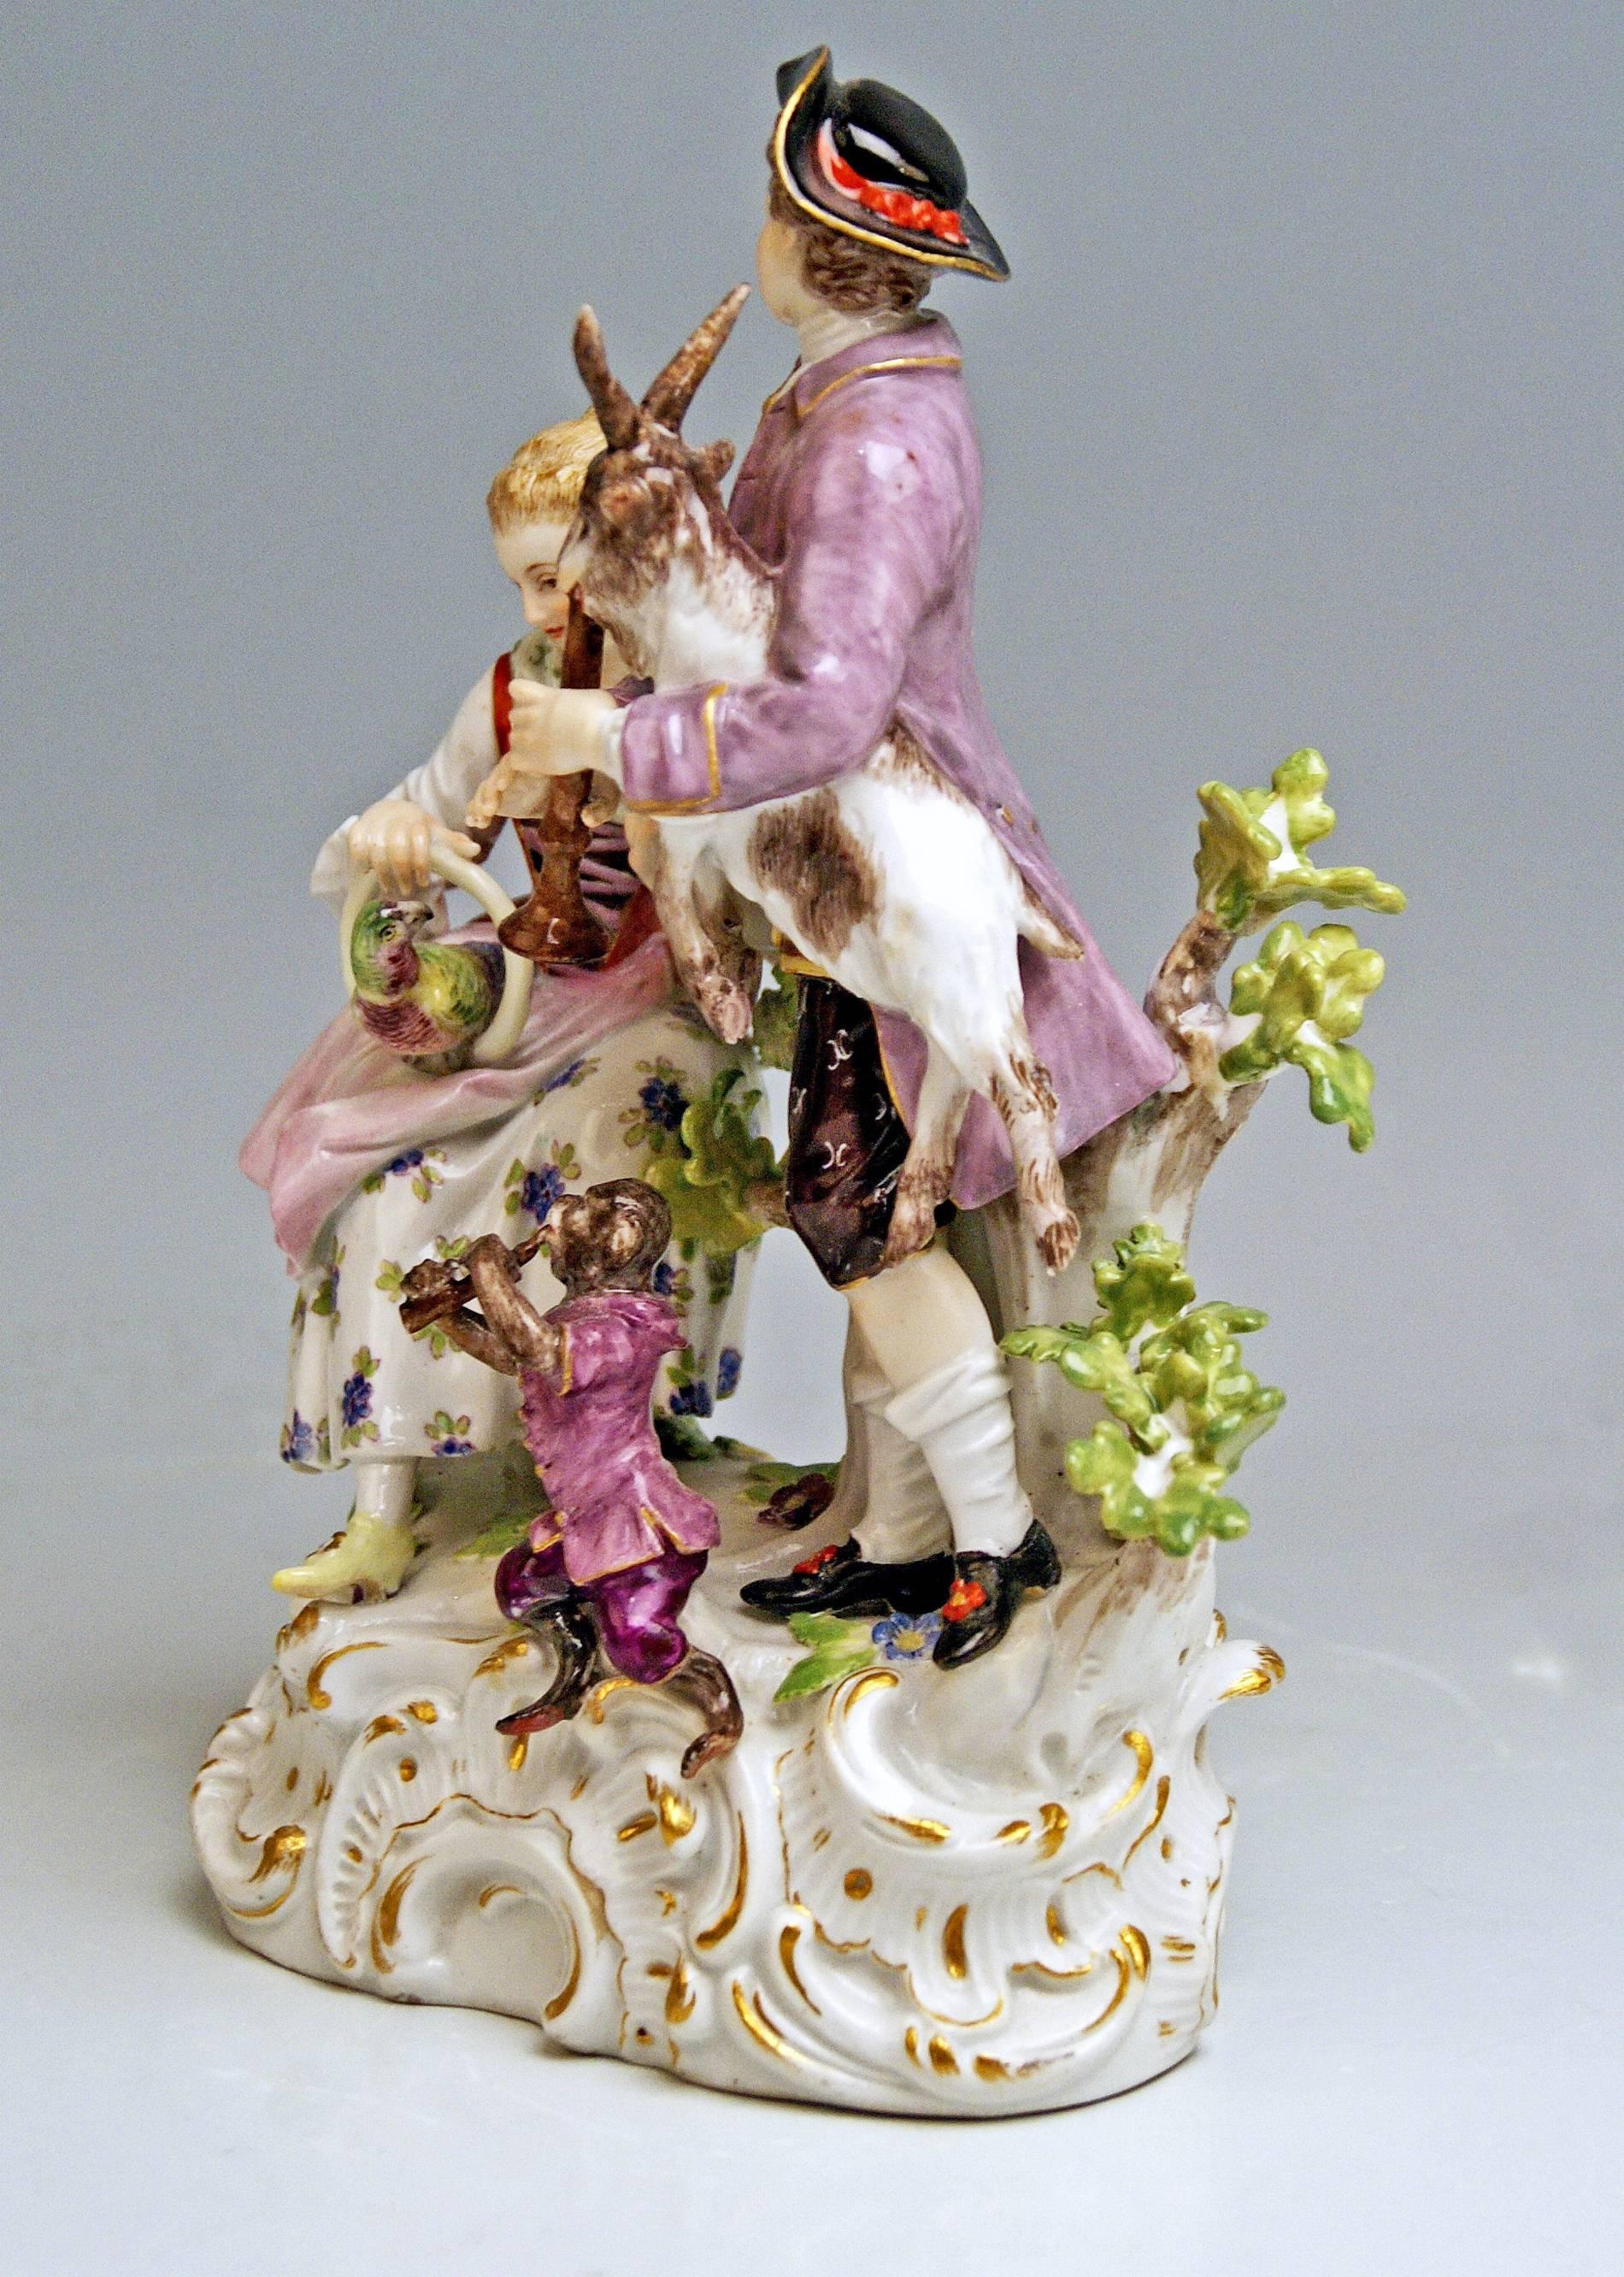 Meissen Figurine group: Allegory of hearing (deriving from a series of five senses)

Manufactory: Meissen
Hallmarked: Blue Meissen Sword Mark with Pommels on Hilts
Model Number 2974
Former's Number 132
Painter's Number 48
First